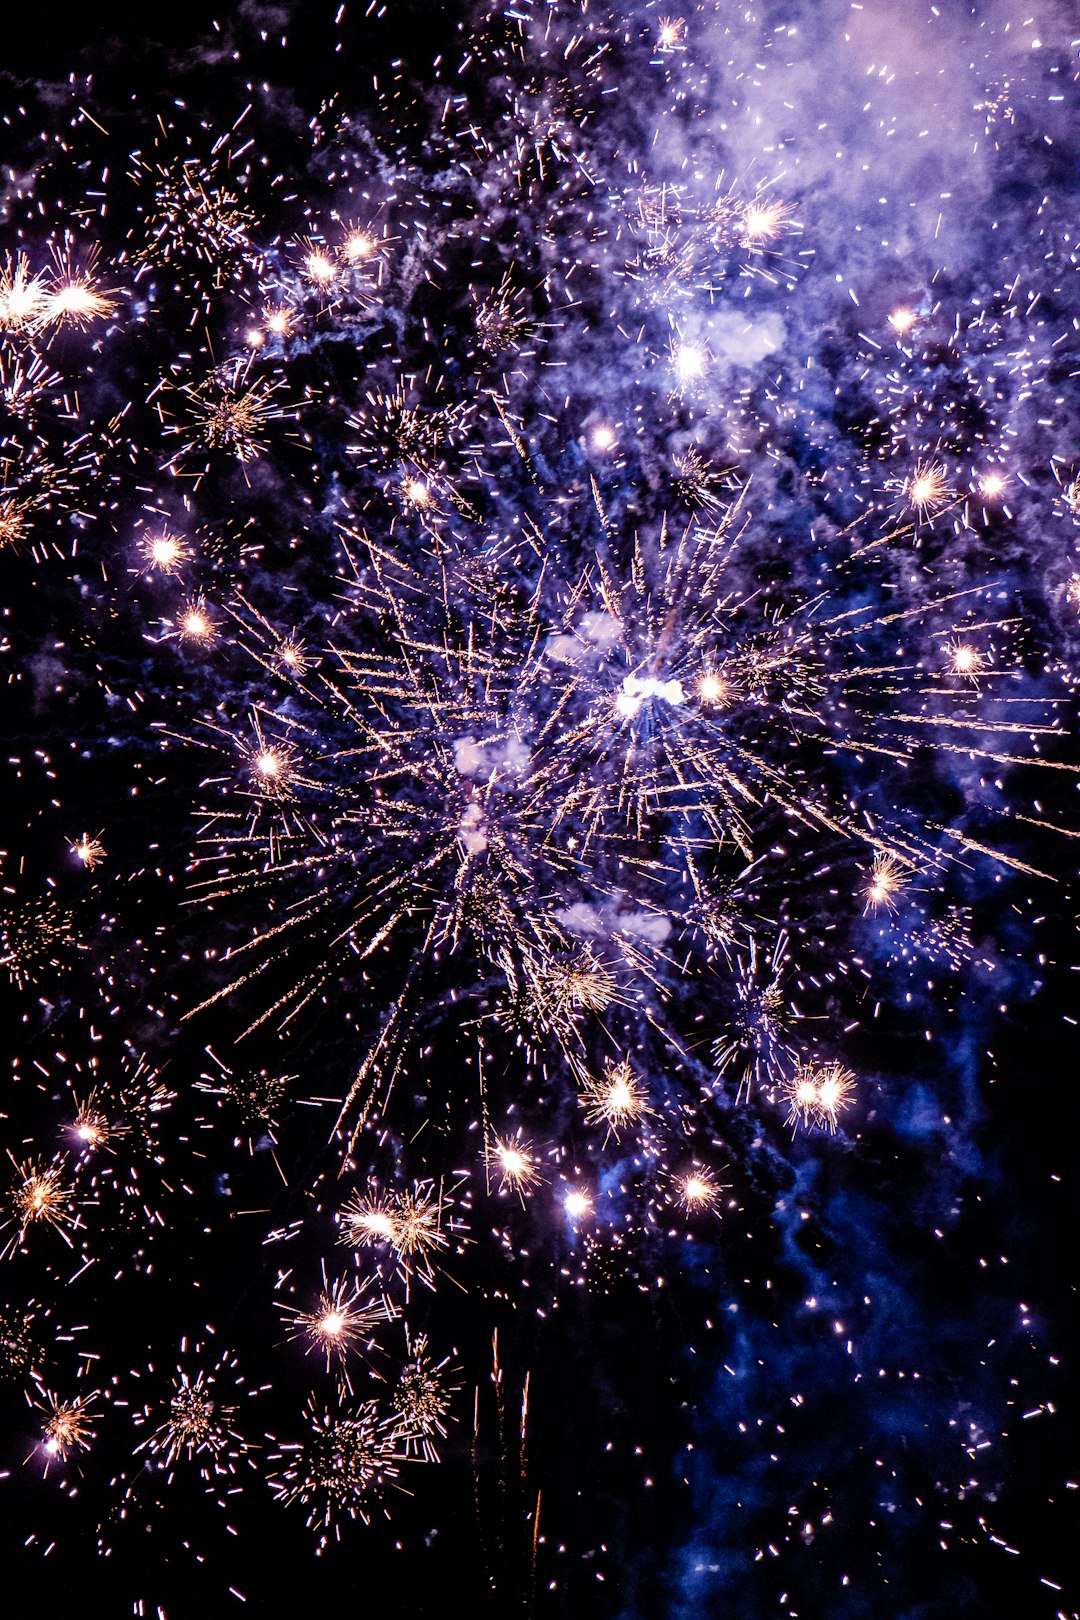 white and blue fireworks display